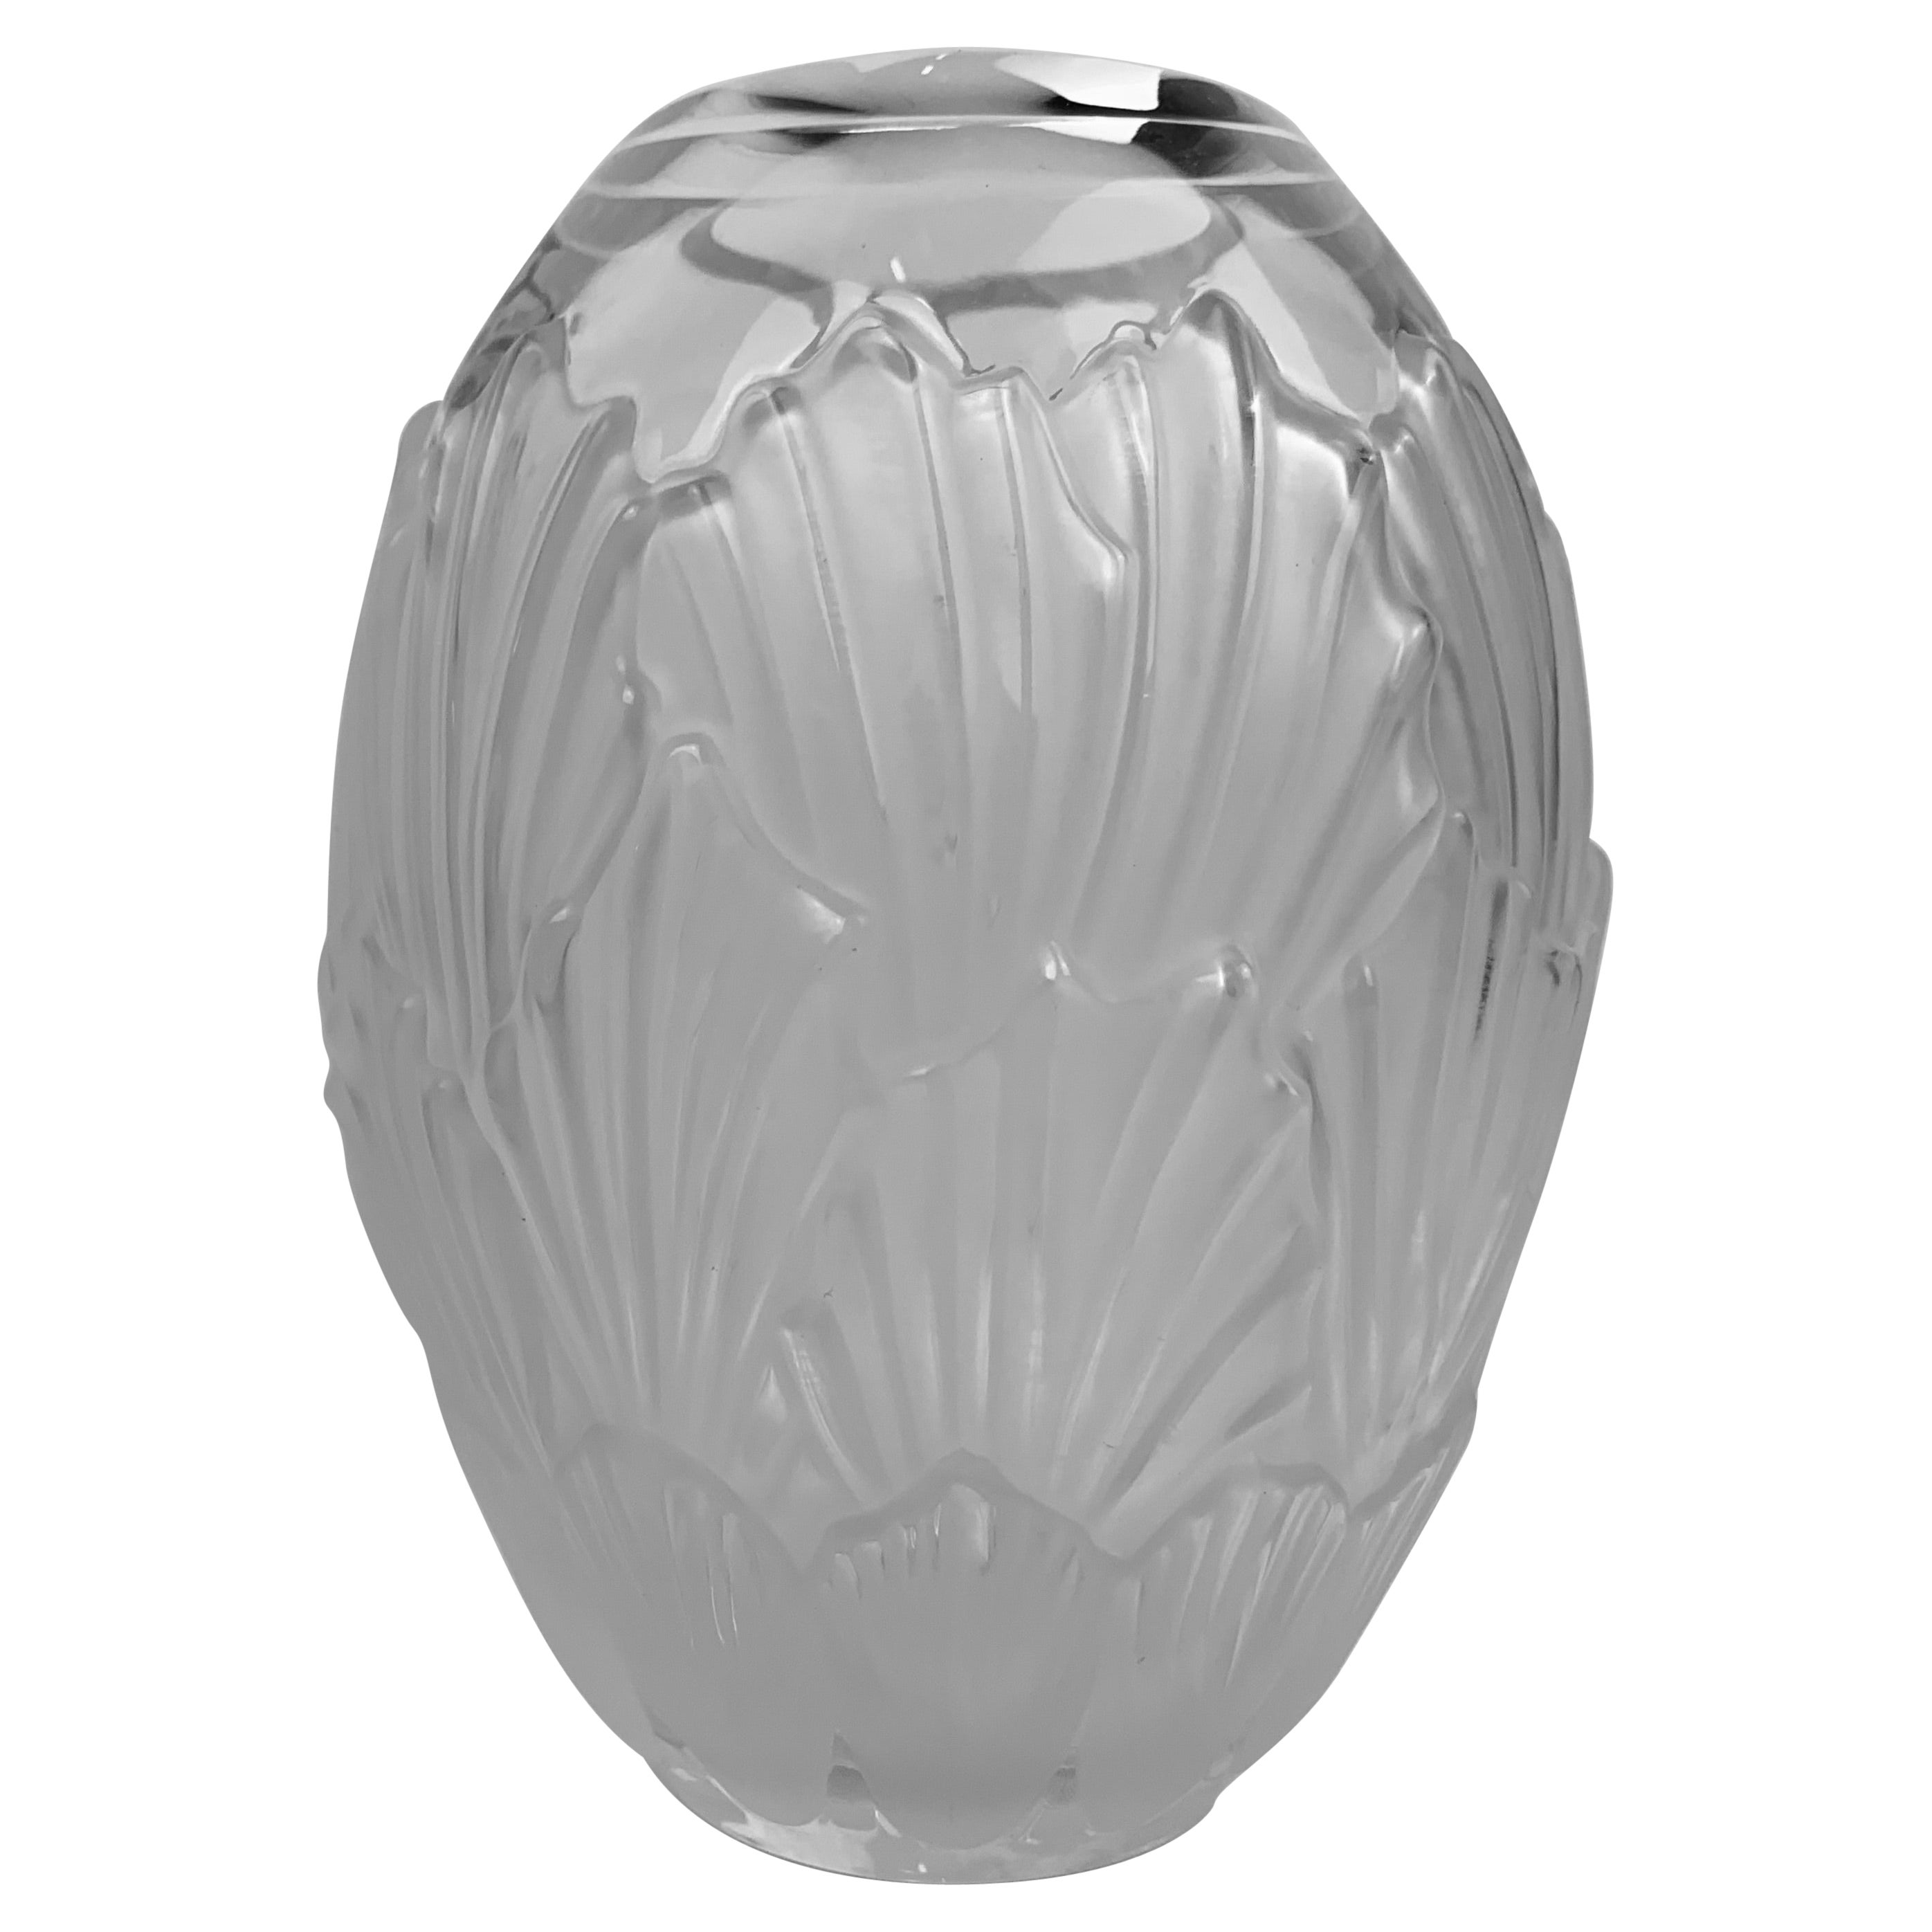 The Lalique frosted glass Sandrift vase was produced in the 1960's in the Art Deco style. It is in ovoid form with frosted overlapping shells. Scribe signed on the bottom Lalique, France.
Measures: H-8.25'
W-6